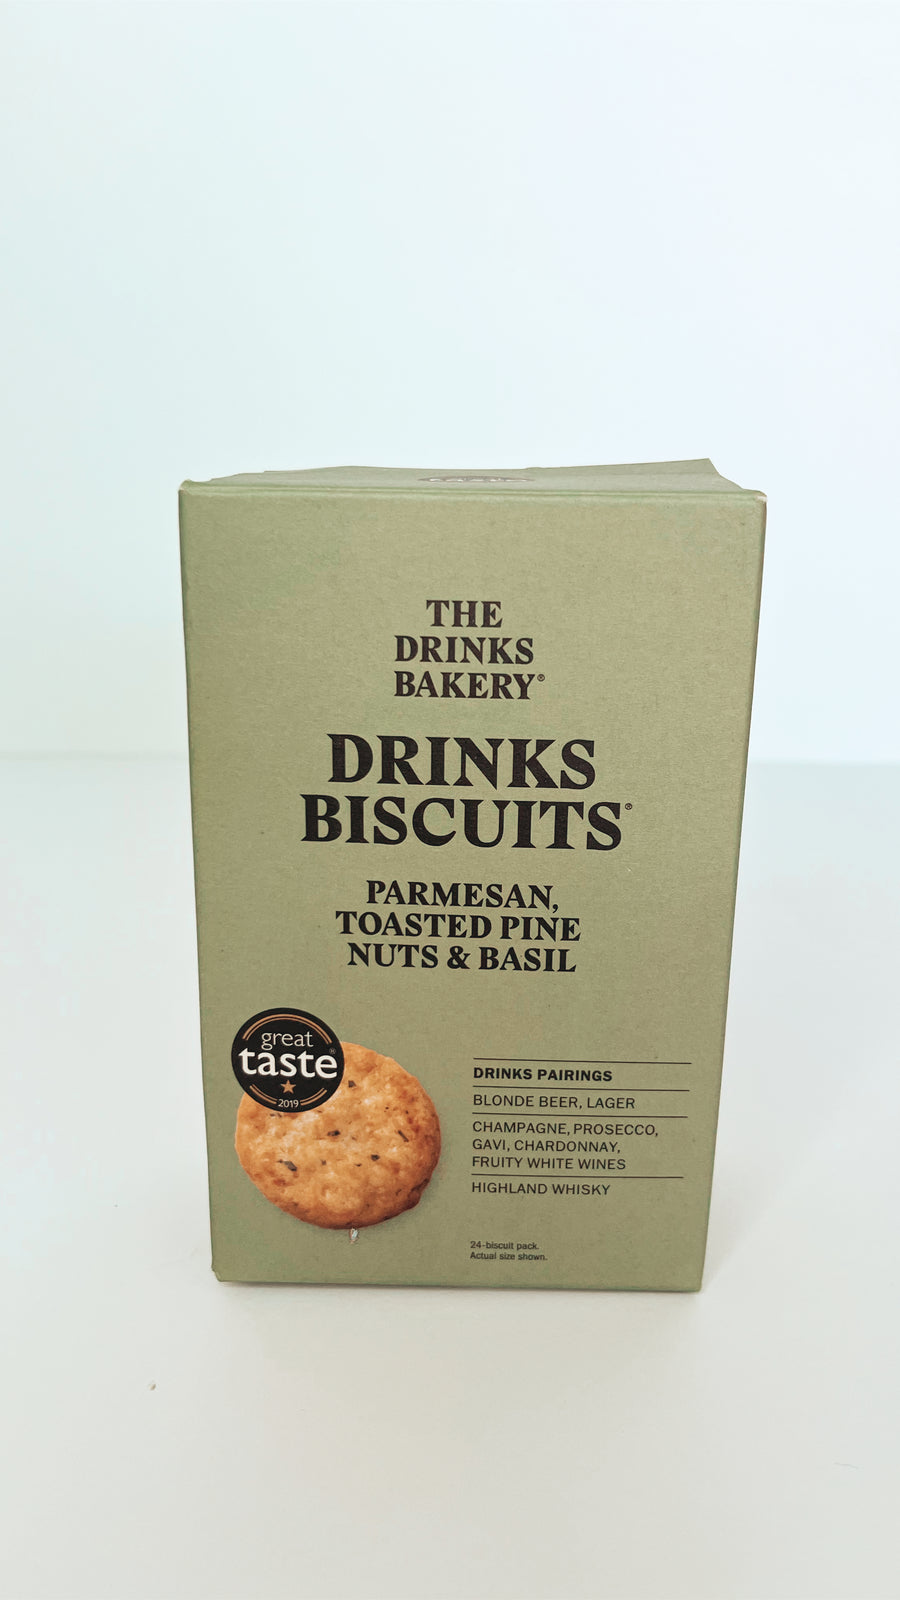 THE DRINKS BAKERY - DRINKS BISCUITS - Parmesan, Toasted Pinenuts & Basil